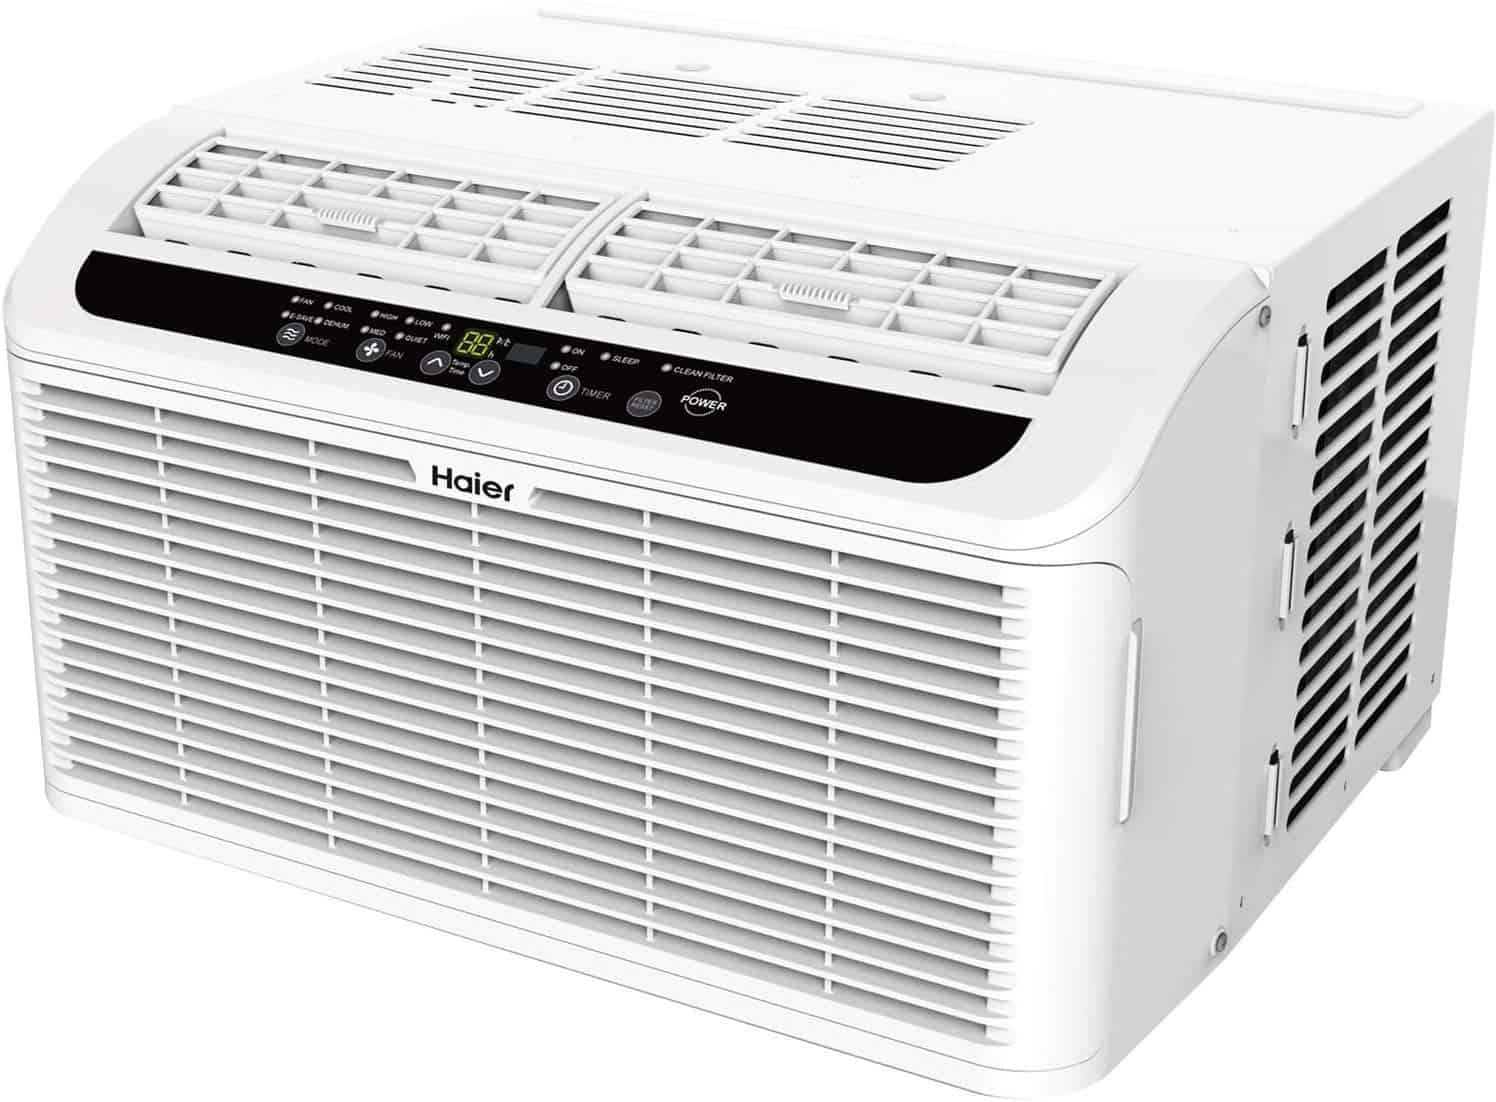 Haier ESAQ406P Window Air Conditioner Review IndoorBreathing